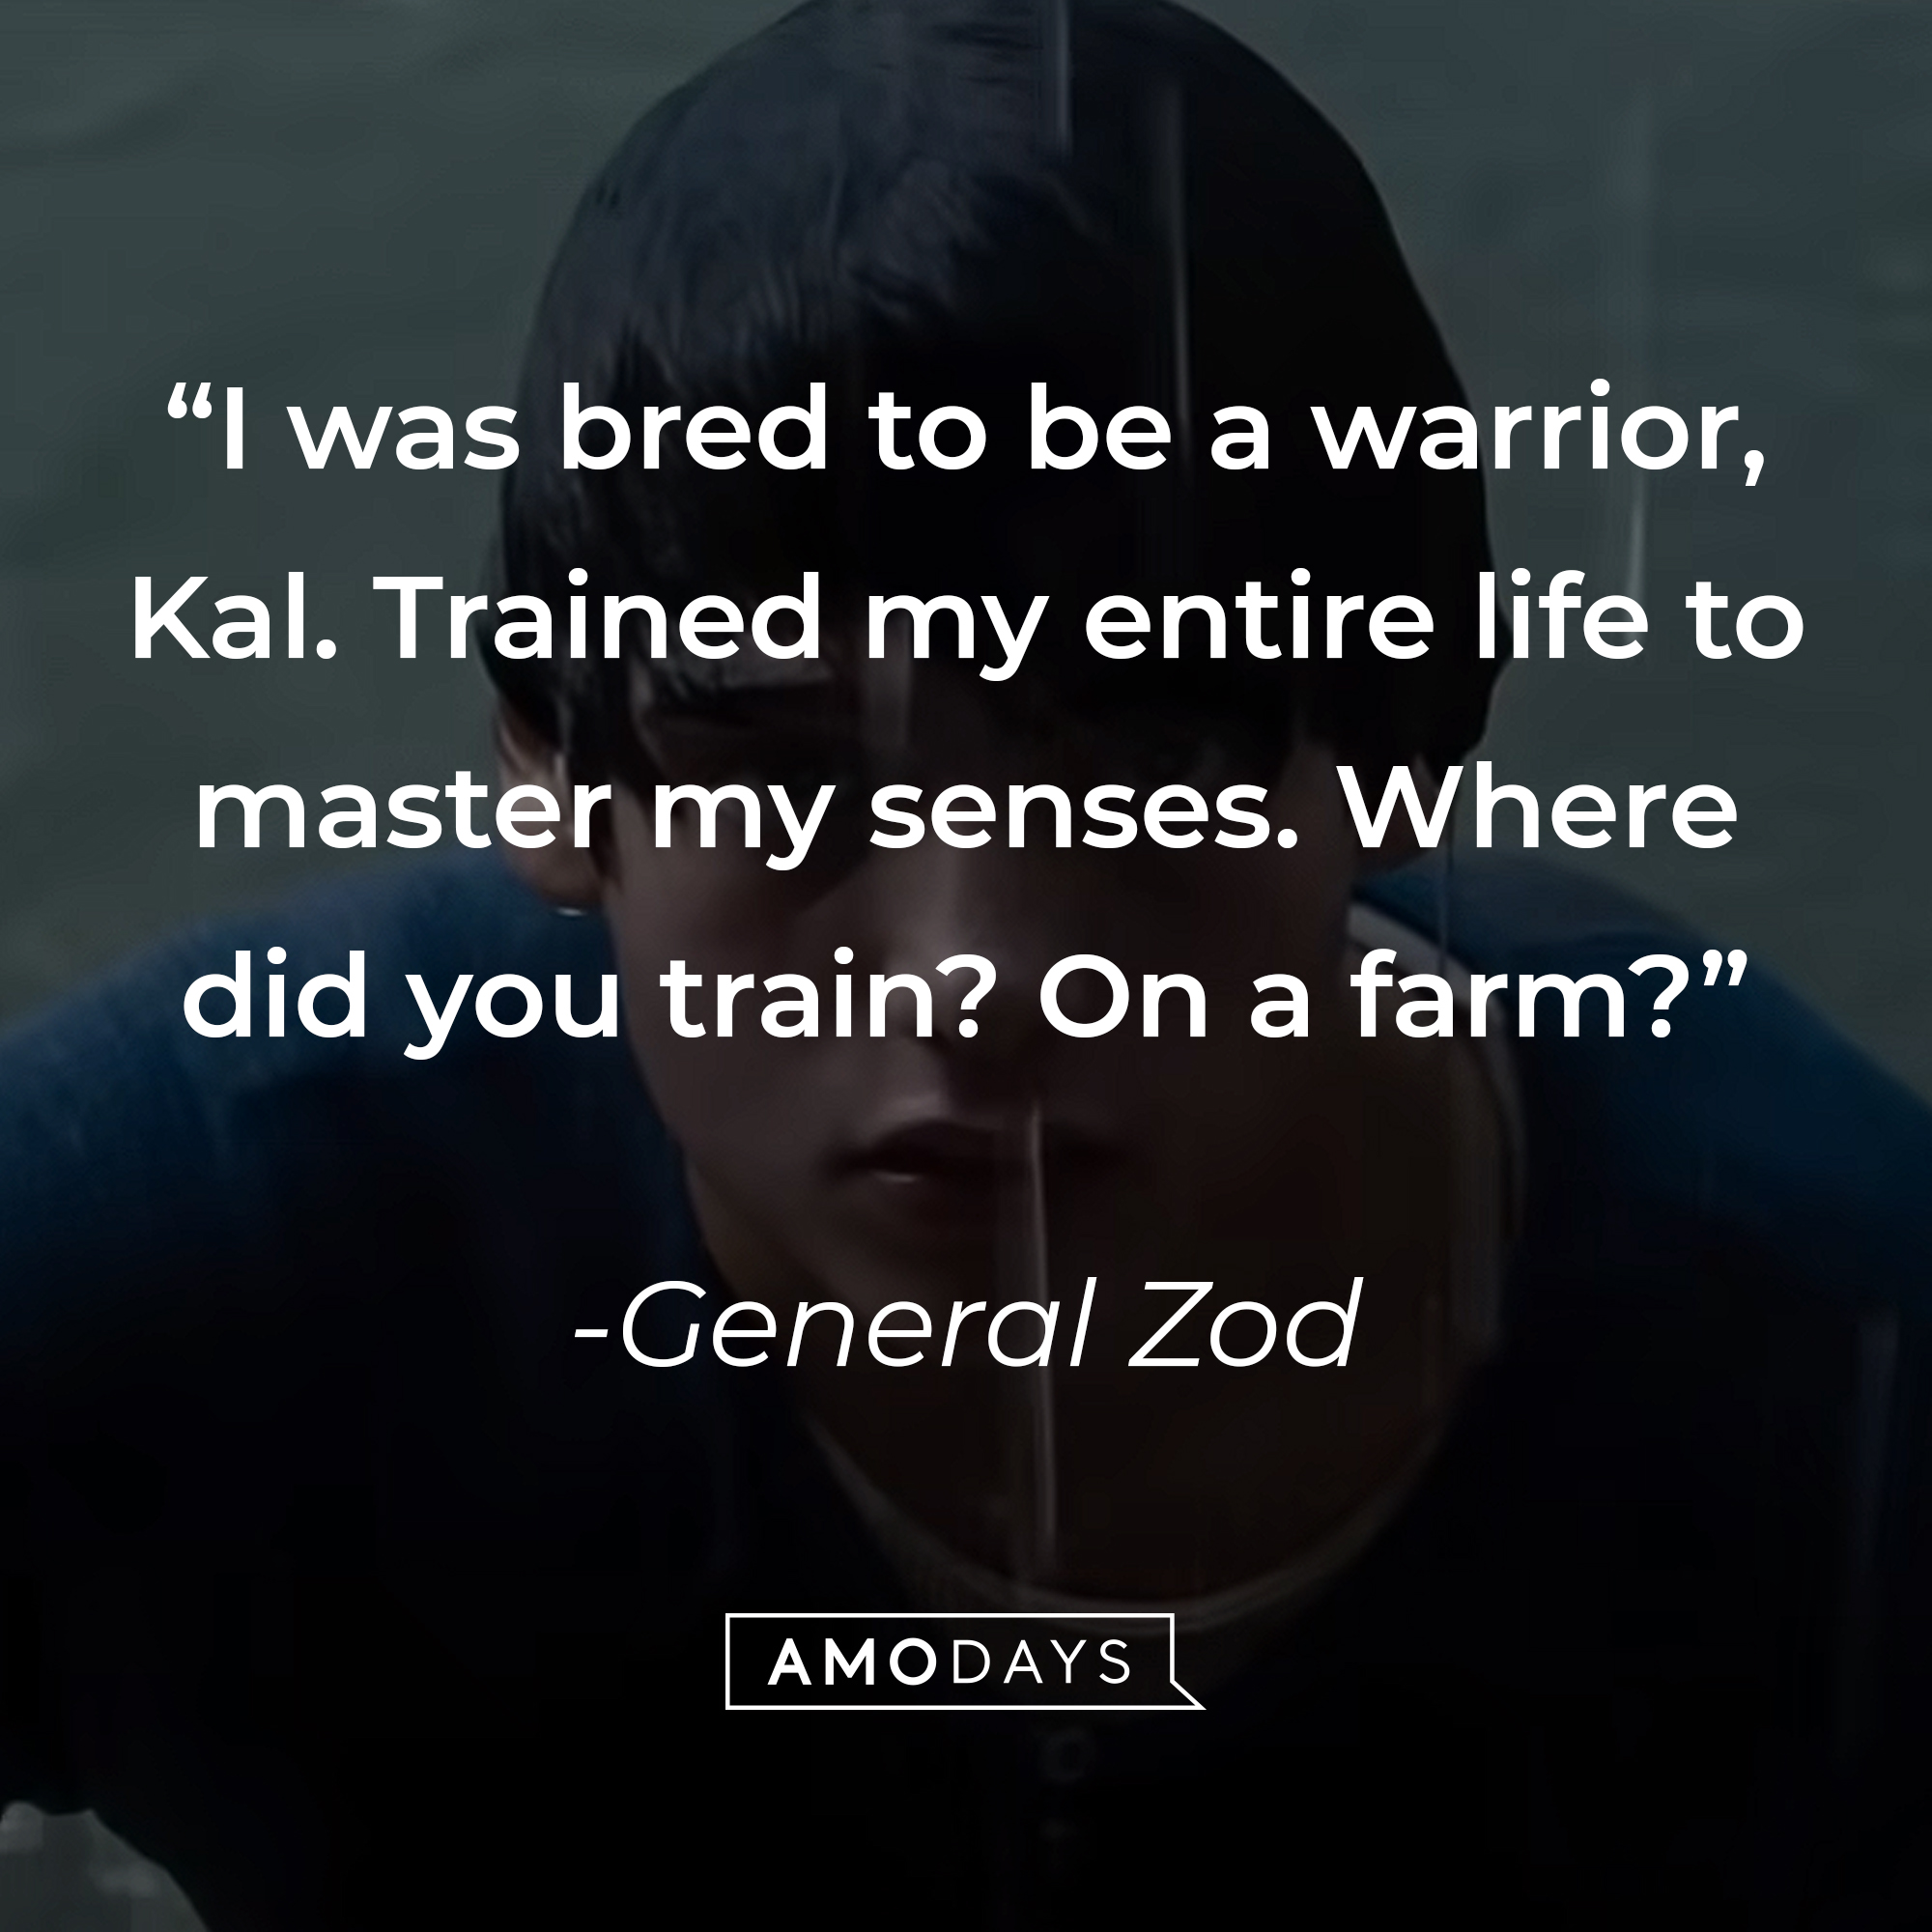 General Zod's quote: "I was bred to be a warrior, Kal. Trained my entire life to master my senses. Where did you train? On a farm?" | Source: Youtube.com/WarnerBrosPictures